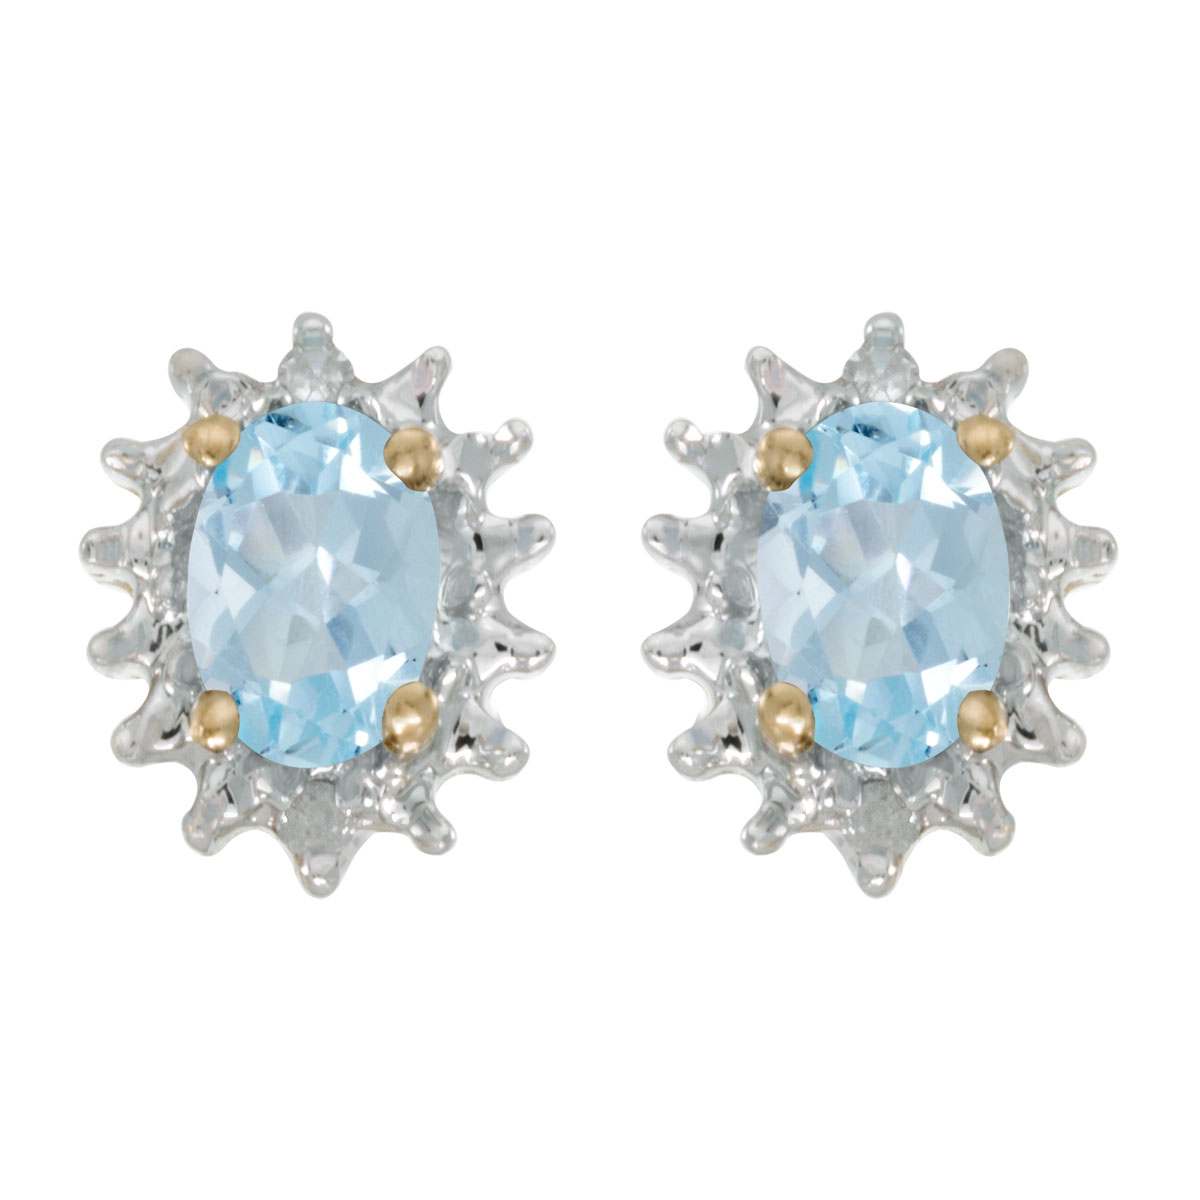 JCX1991: These 14k yellow gold oval aquamarine and diamond earrings feature 6x4 mm genuine natural aquamarines with a 0.58 ct total weight and .04 ct diamonds.